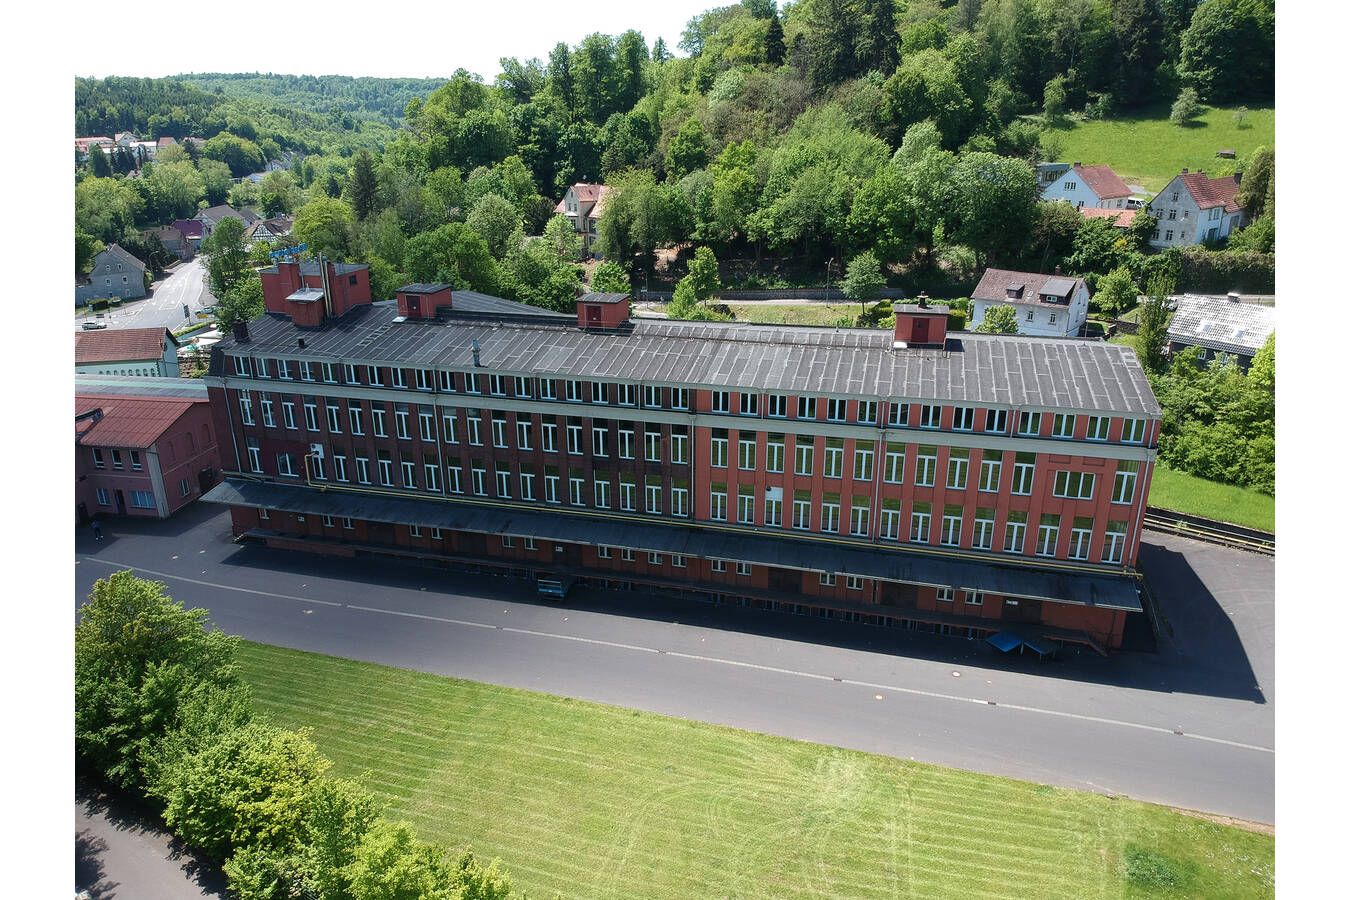 Spray design revives industrial monument With the acquisition of the Buderus building, the company A. Ebbecke expands Verfahrenstechnik AG in the Wetterau.